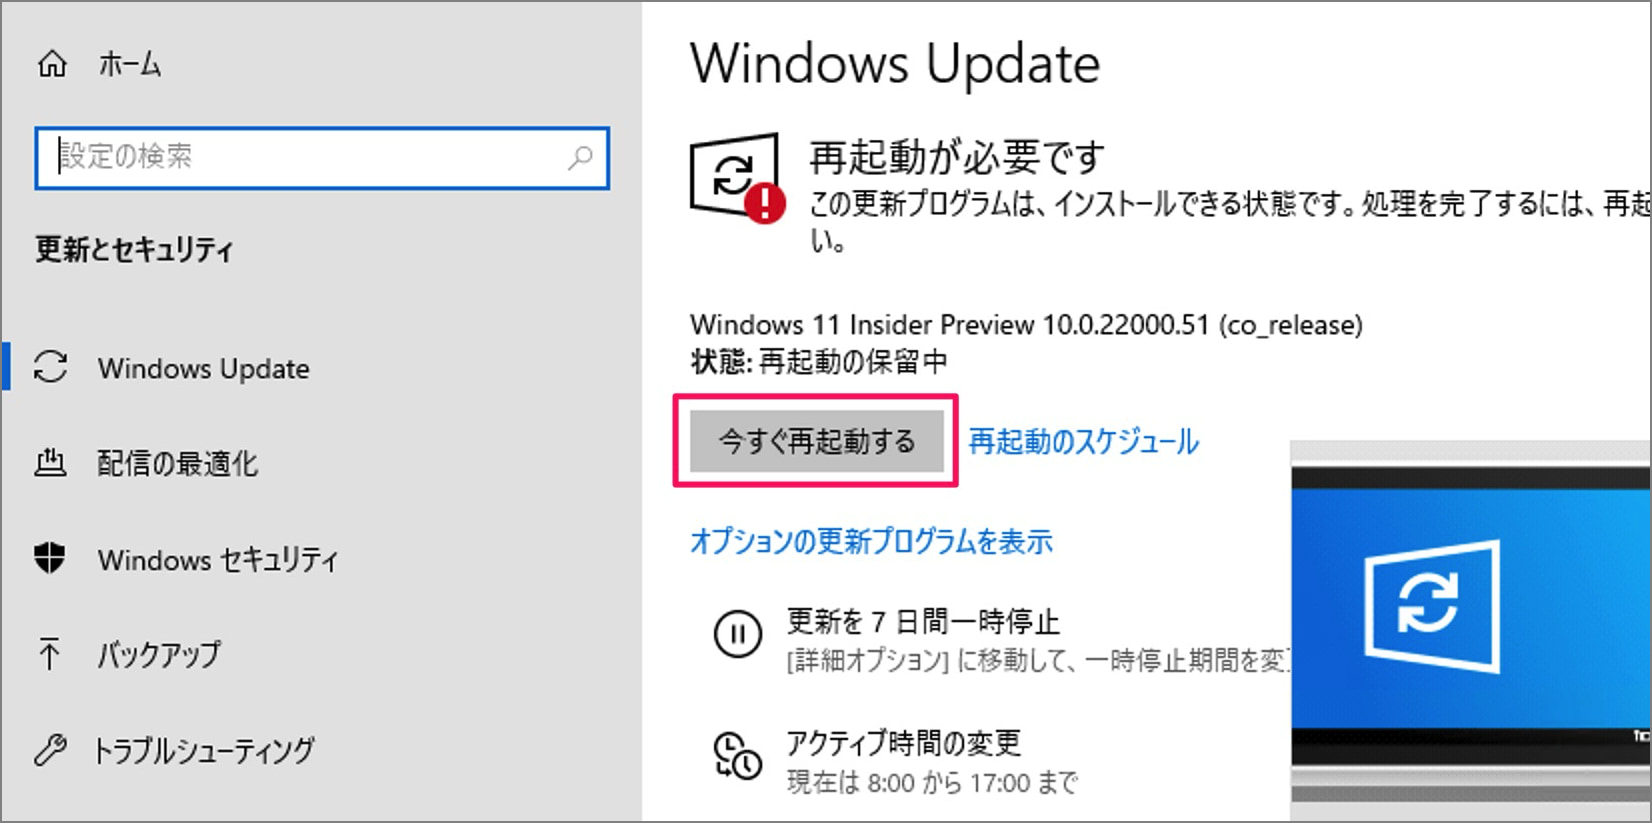 windows 11 insider preview not downloading